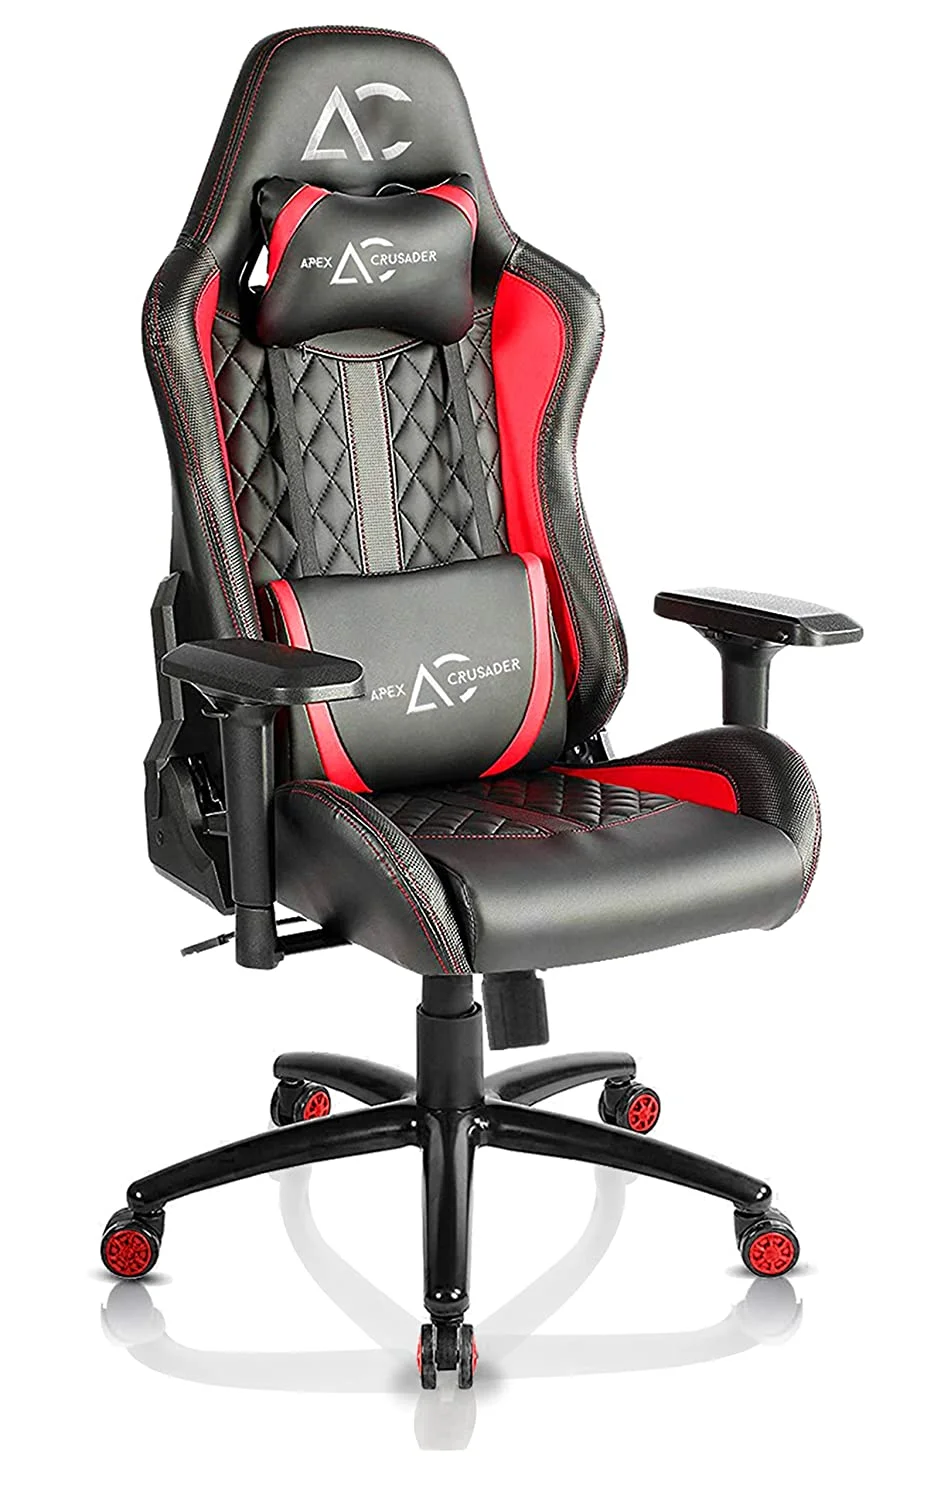 ApexApex Crusader XI Gaming Chair In Red Under 20000-Crusader-XI-Gaming-Chair-In-Red-Under-20000